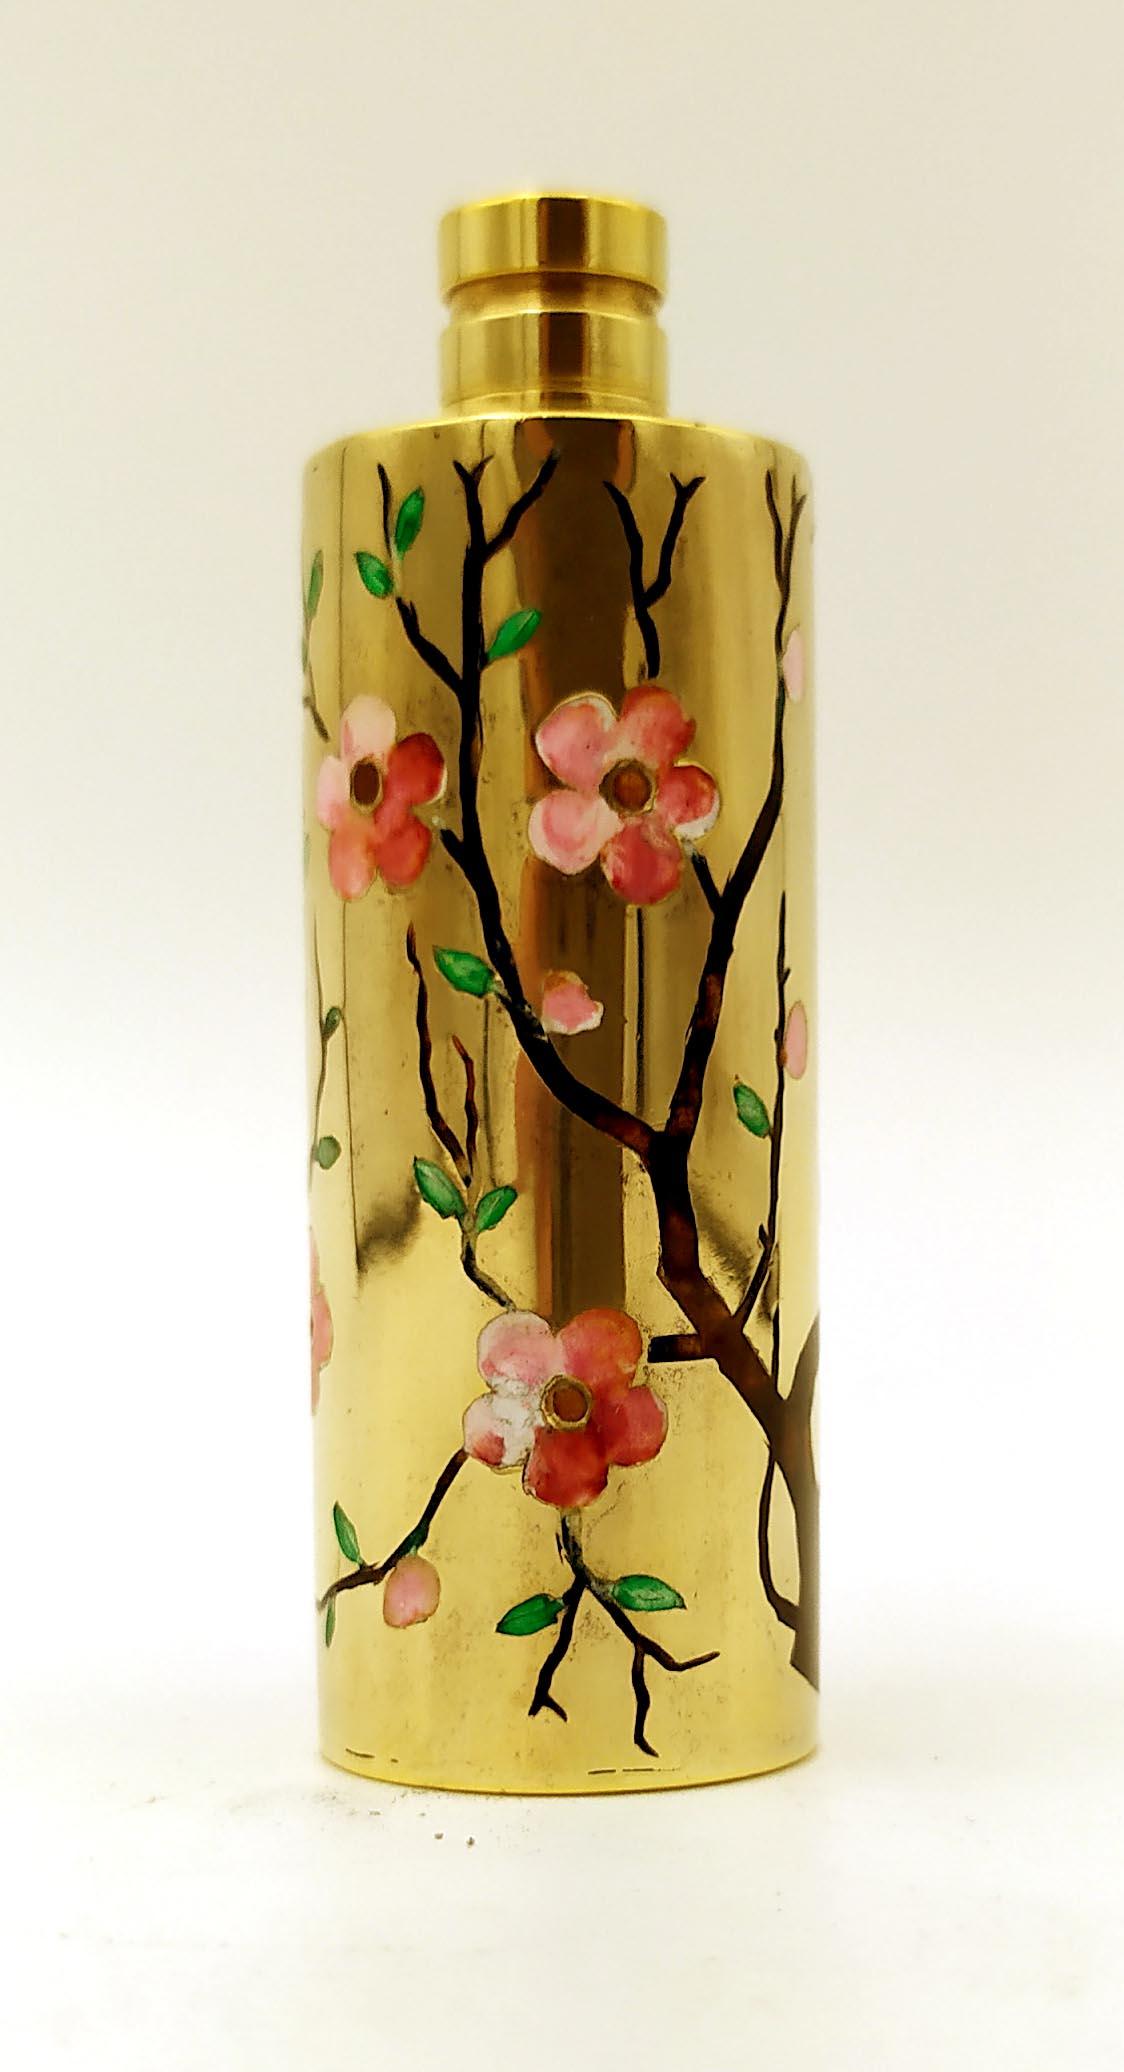 Cylindrical handbag perfume holder in 925/1000 sterling Silver gold plated with screwed cap and fine manual engraving of peach blossom shoots, fire enamelled with various colours, in early 20th century Art Nouveau style. Diameter cm. 2 total height